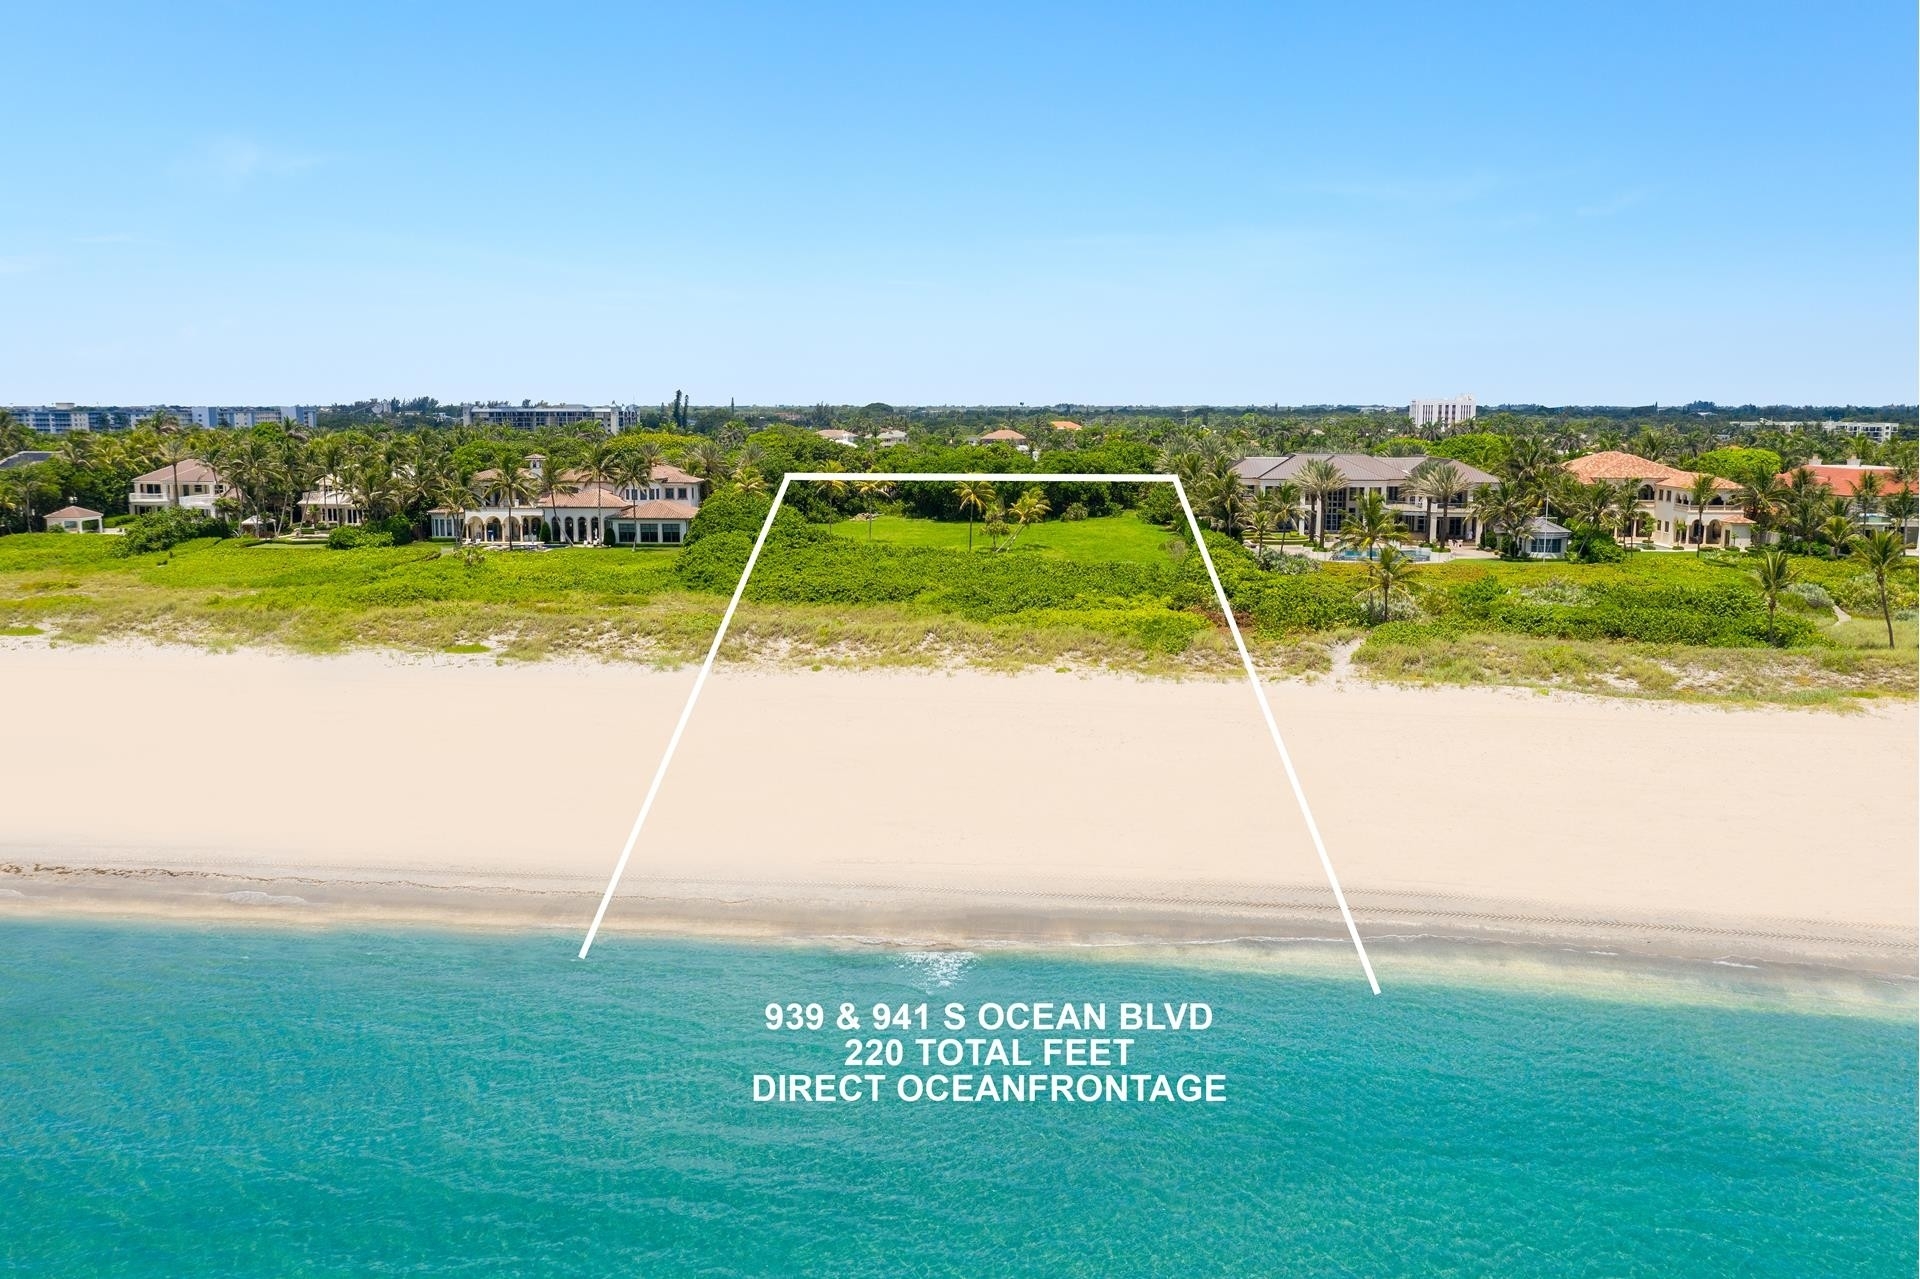 Land for Sale at Delray Beach Association, Delray Beach, FL 33483